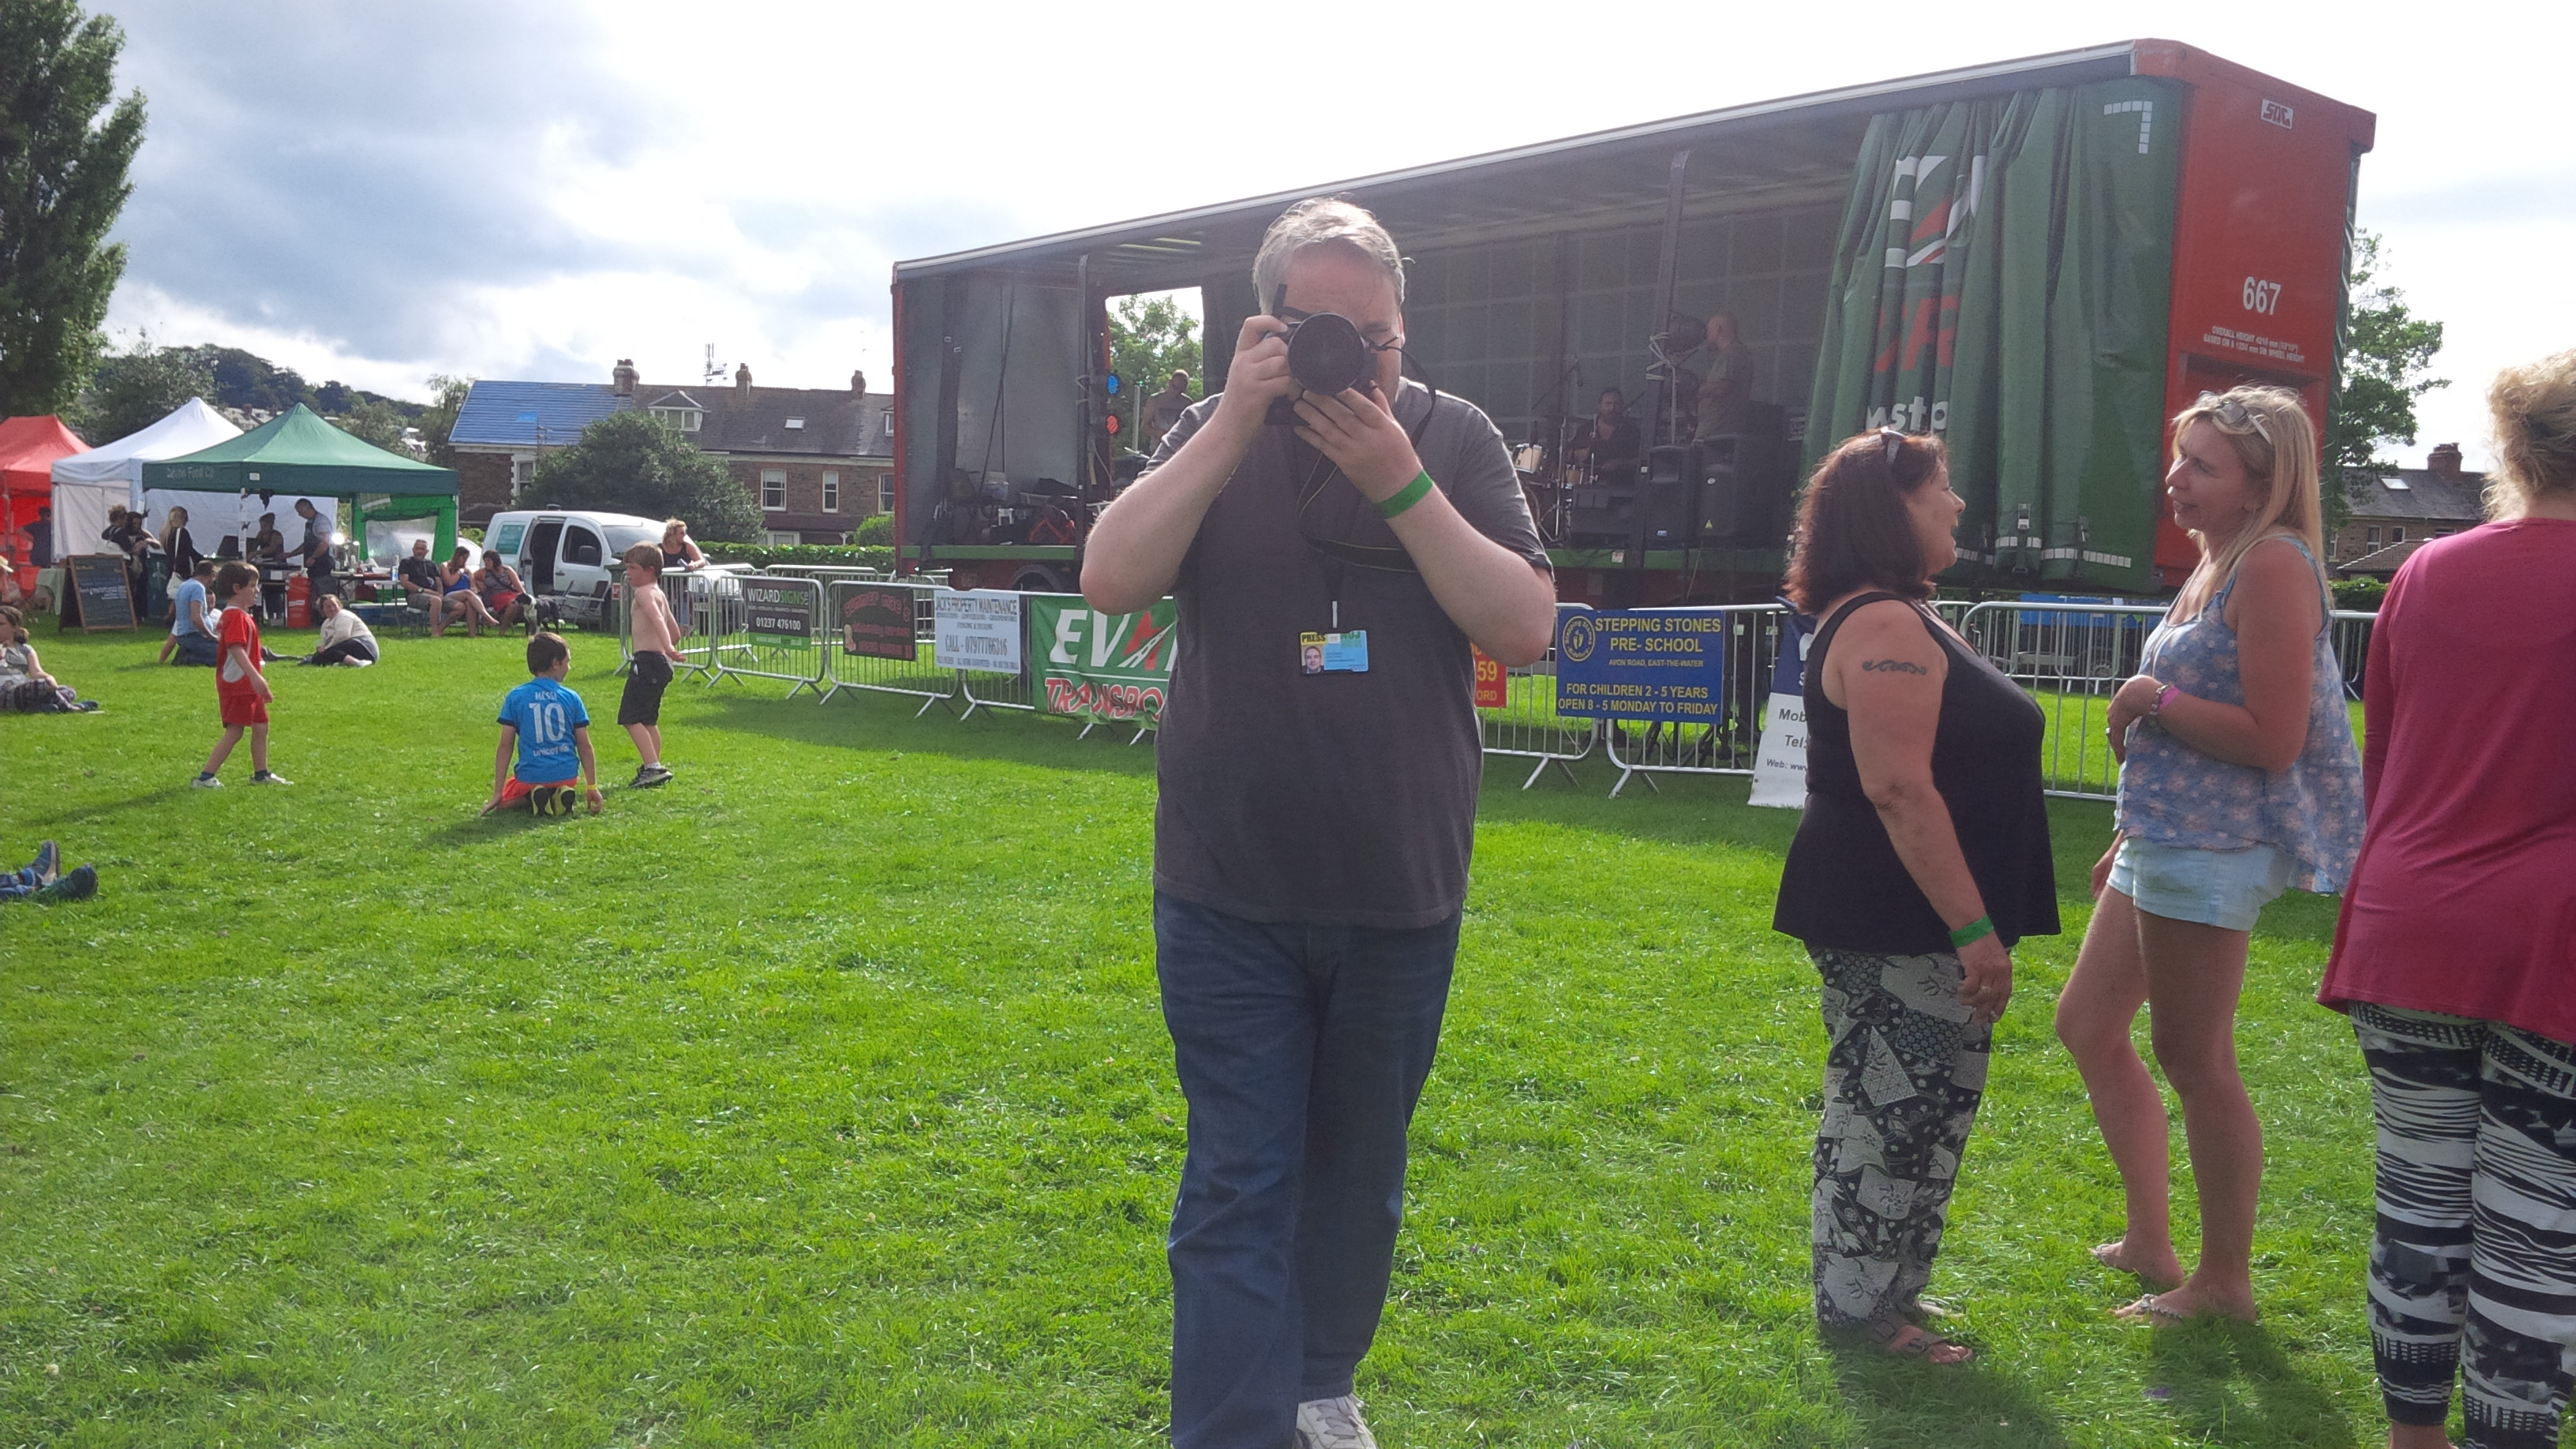 Michael Collins Taking Photos at the Bideford Music Day